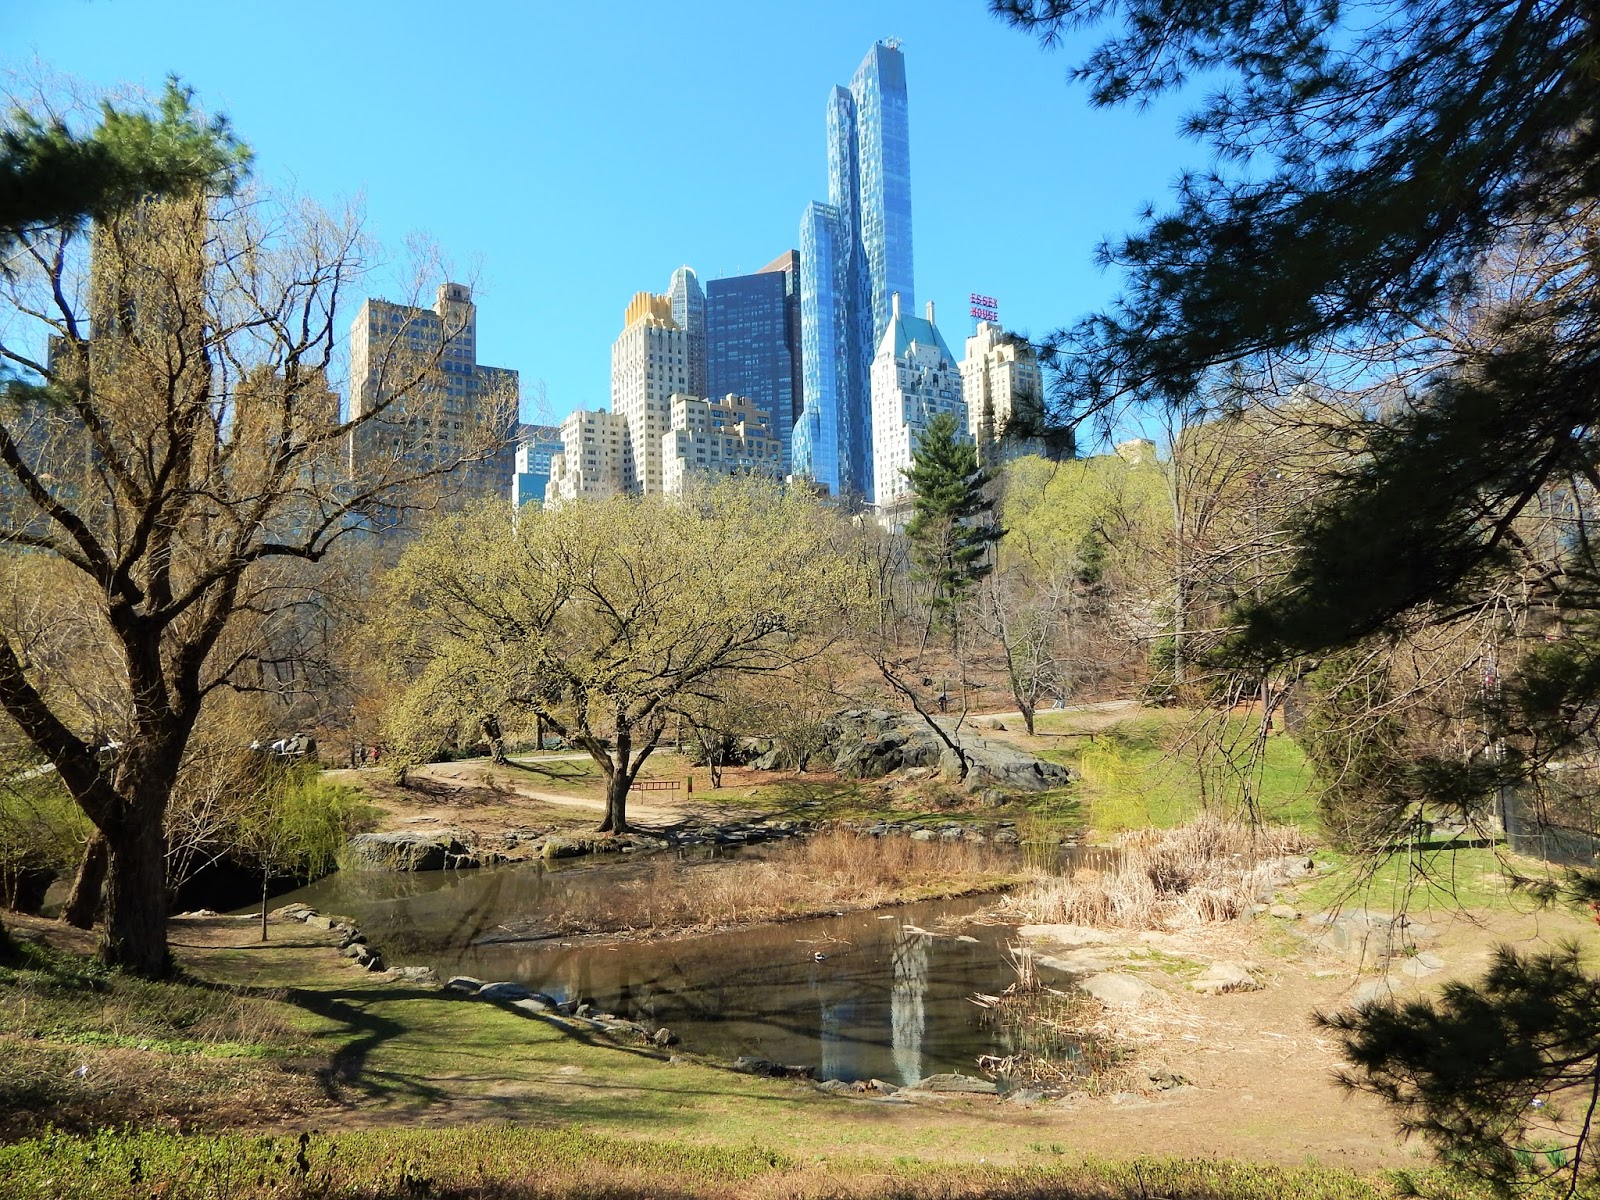 TRAVEL GUIDE: UPTOWN, CENTRAL PARK, HARLEM, NYC, USA